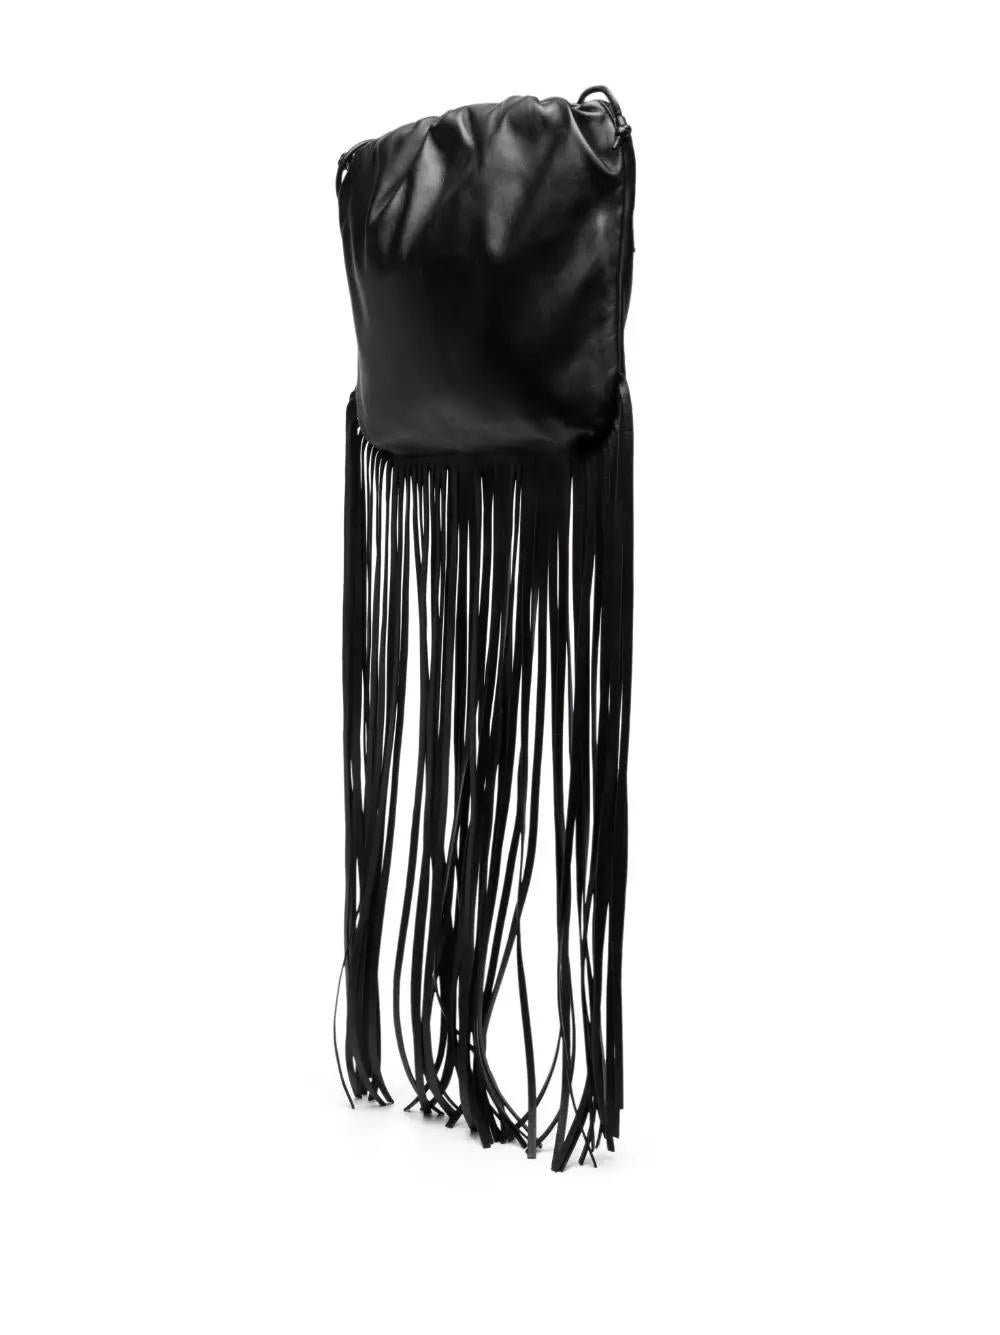 * Black
* Calf leather
* Smoothing finish
* Fringe detailing
* Drawstring fastening
* Single shoulder strap
* Very Good Condition: Minor scratches can be seen at the bottom of the main bag. 

Please note that most of the items we carry have been